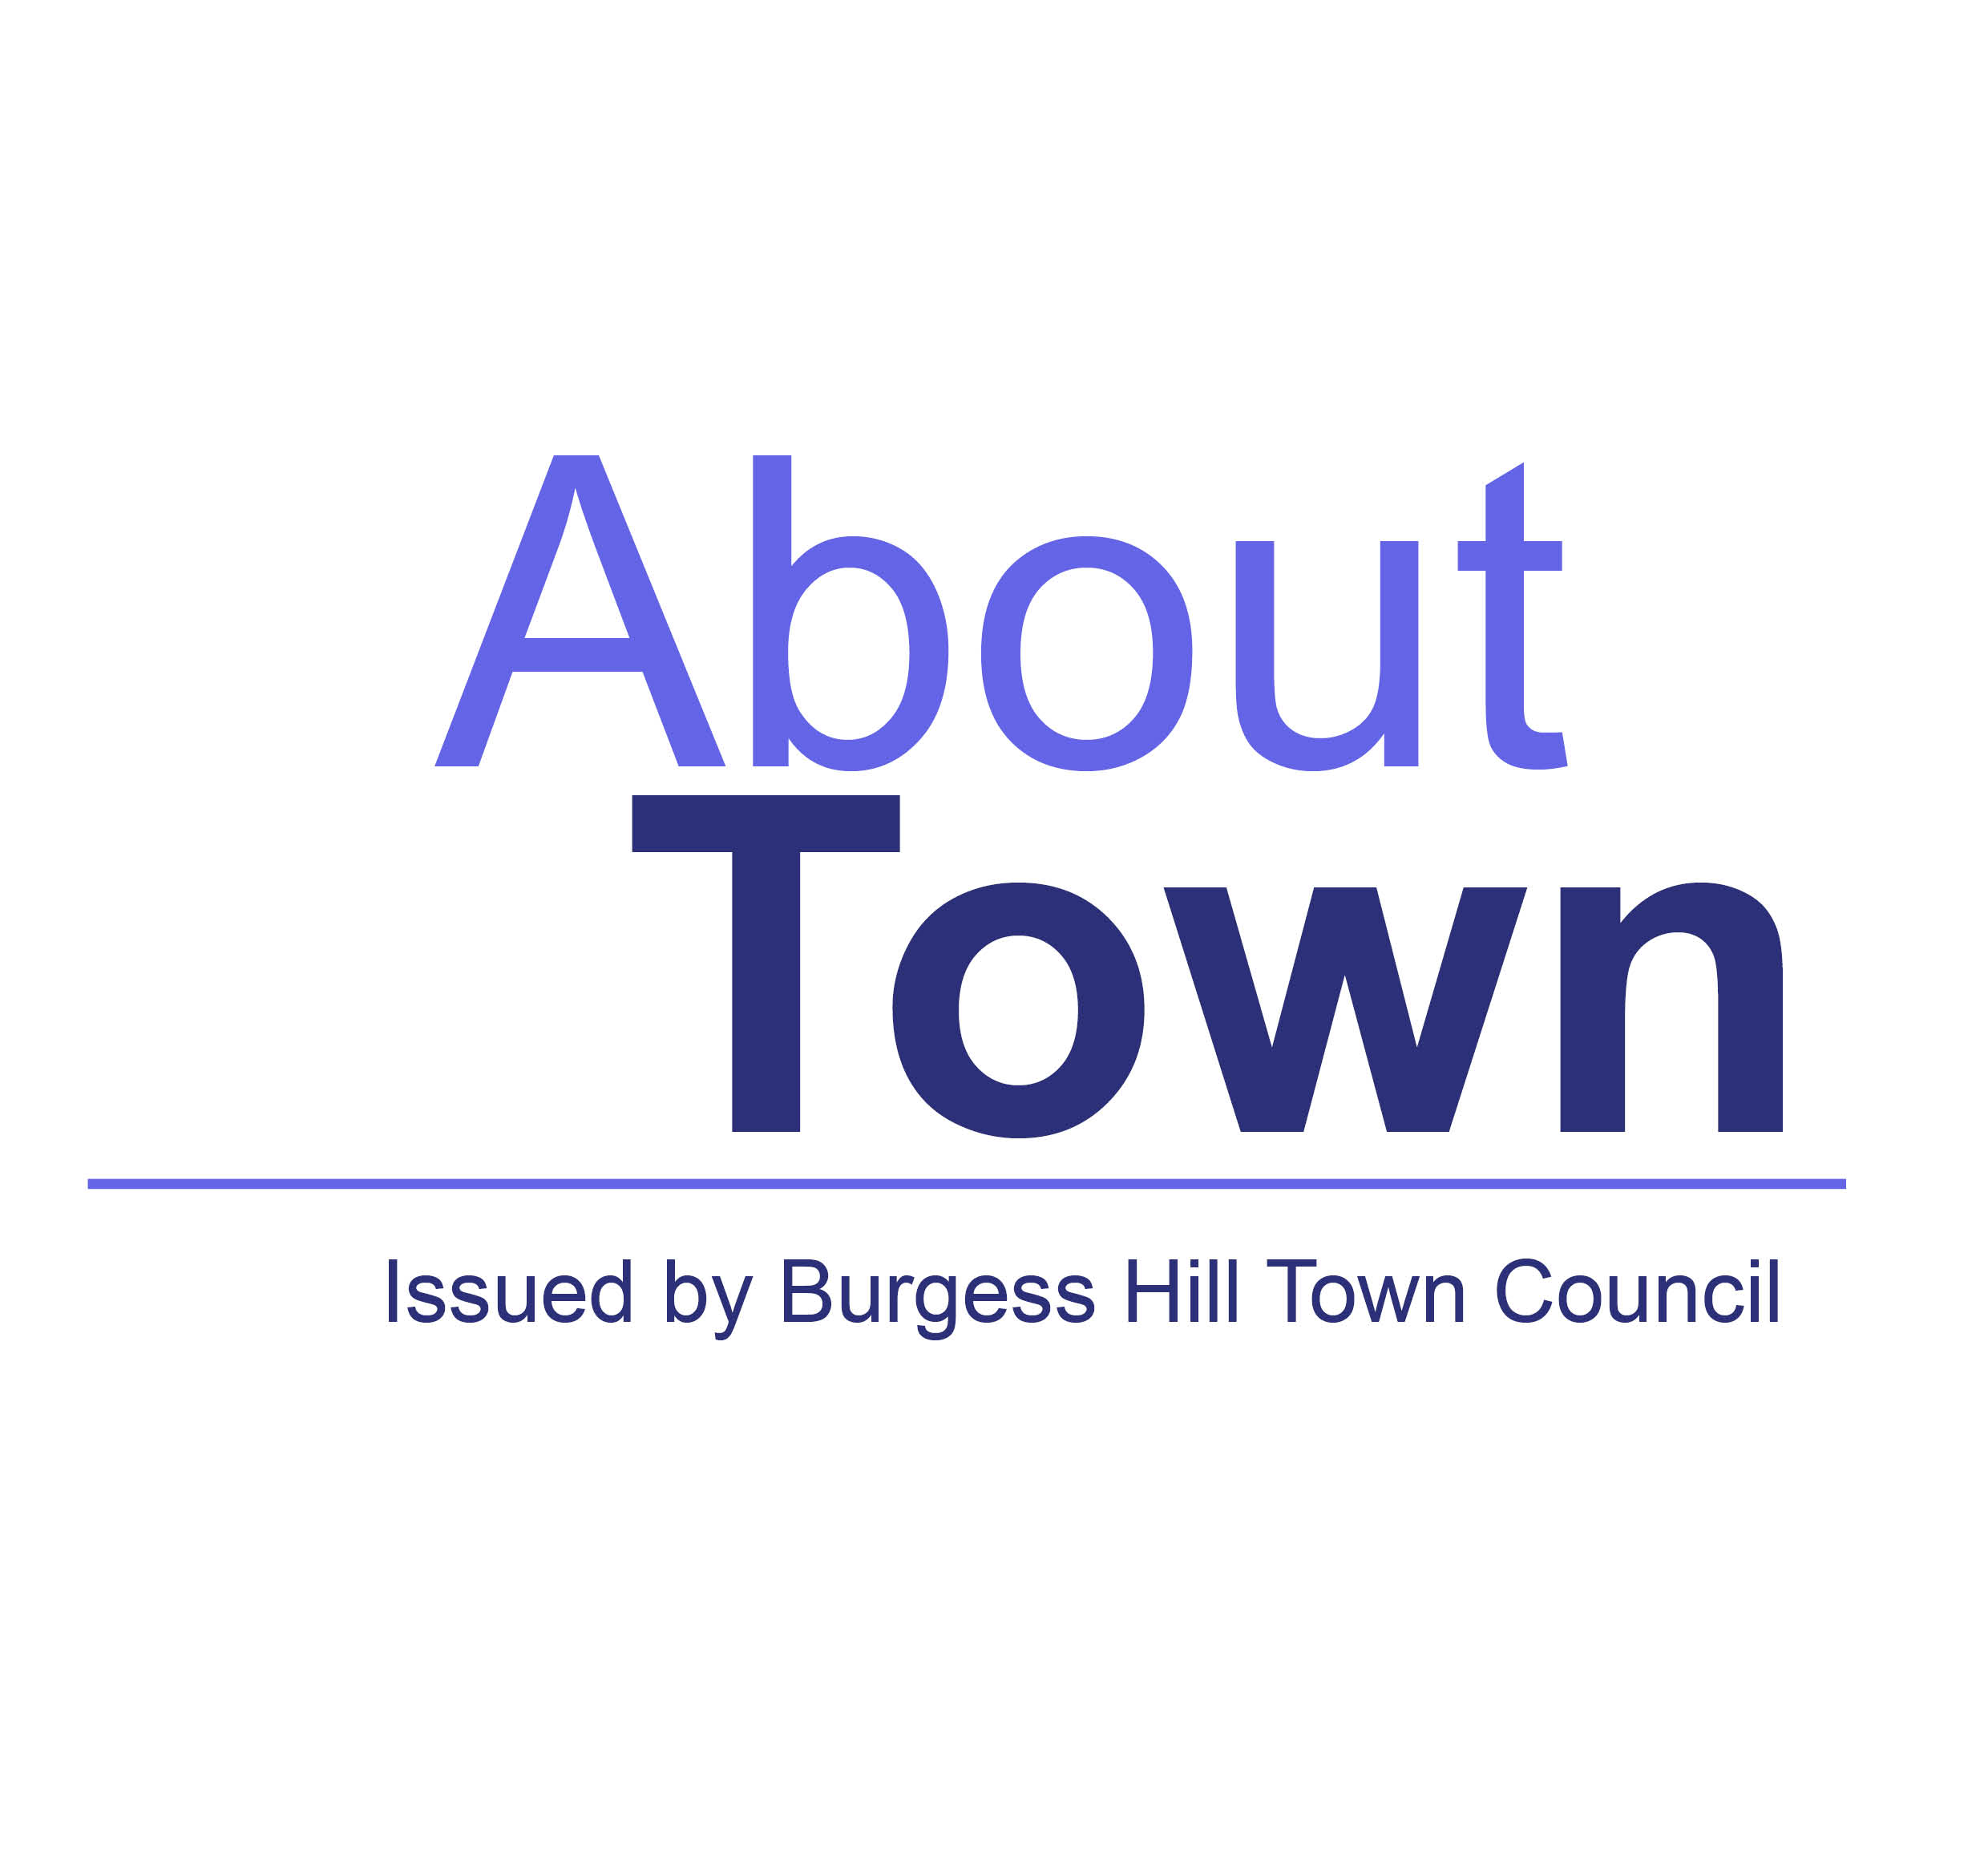 About Town logo